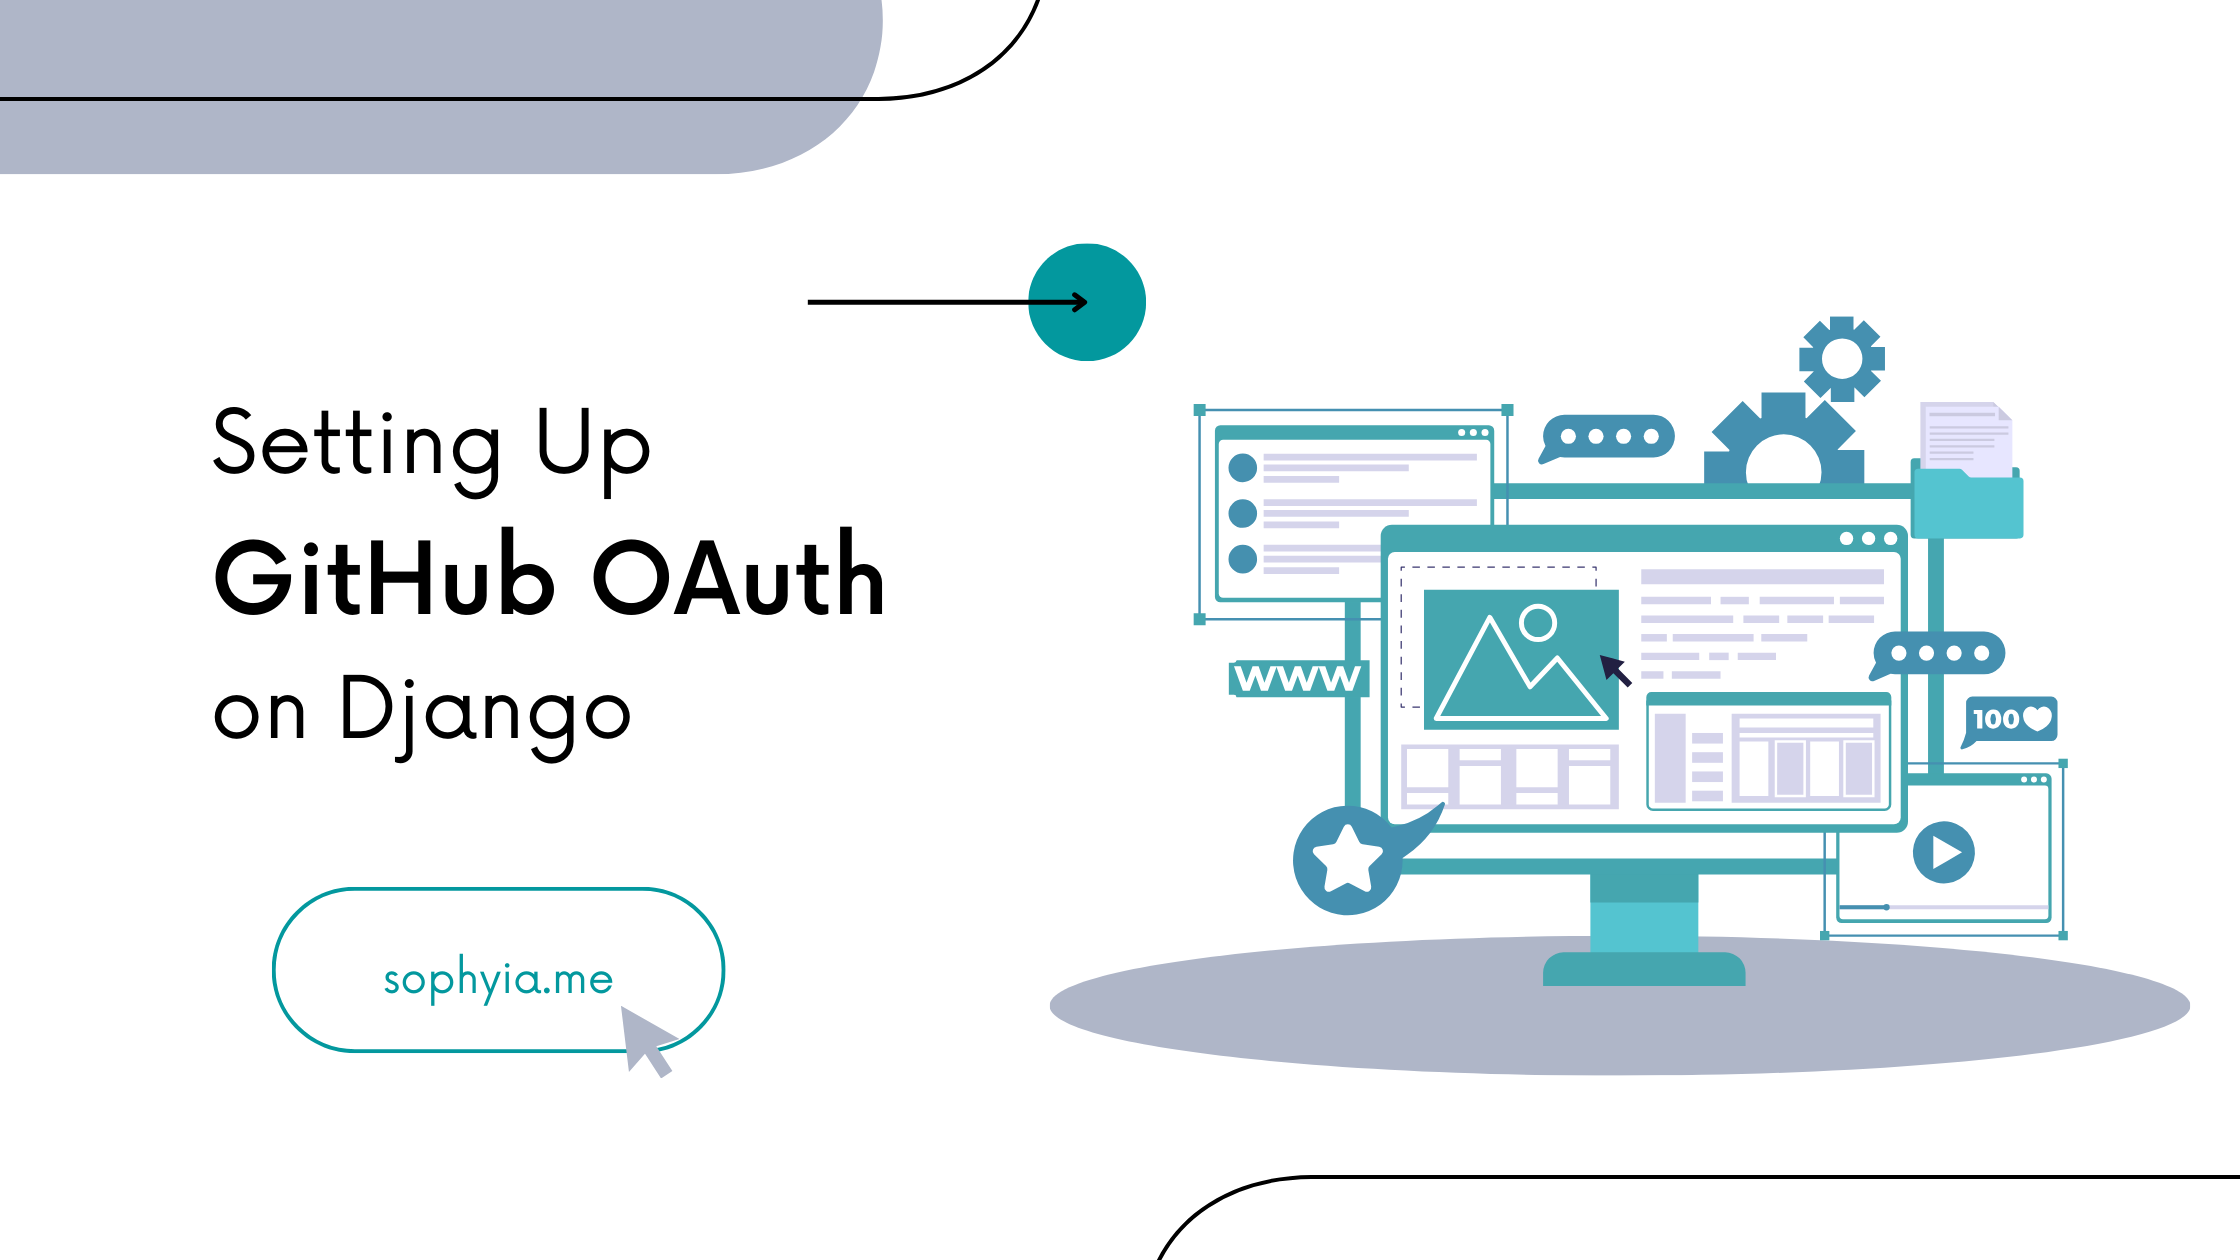 How to Set Up GitHub OAuth in a Django App for User Authentication